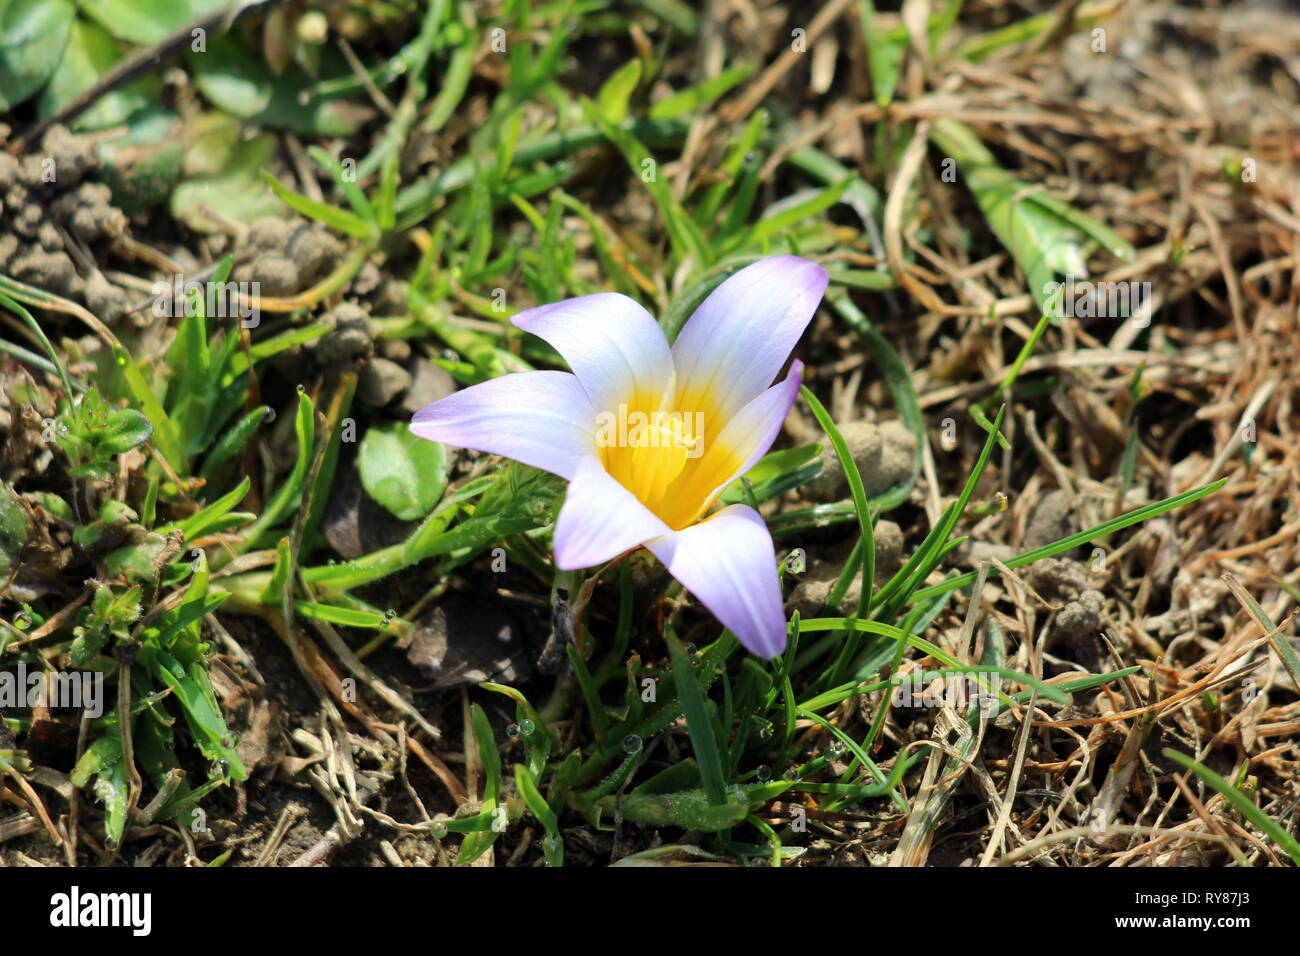 Romulea bulbocodium flowering plant with six white to violet tepals and yellow center surrounded with long and slender green leaves and other plants Stock Photo